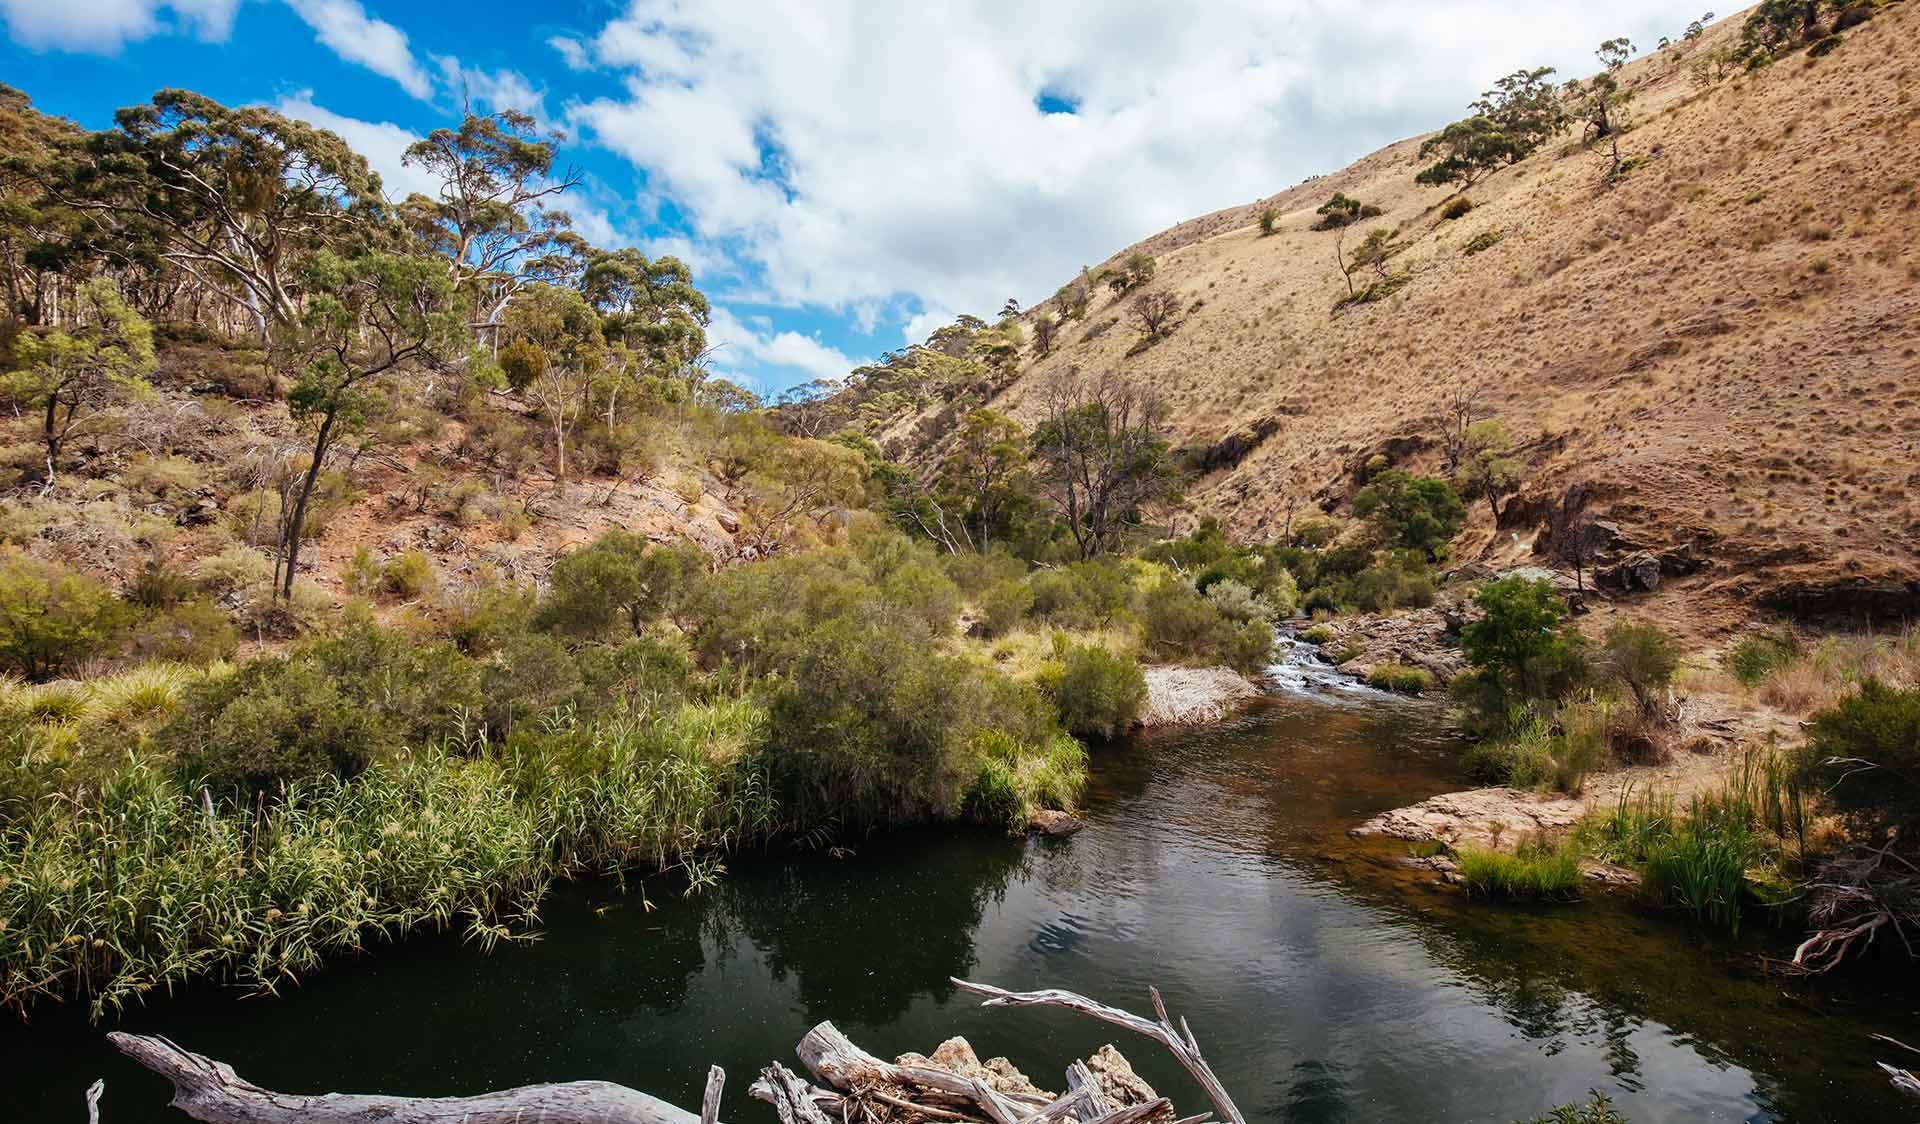 The Werribee River flowing through Werribee Gorge State Park